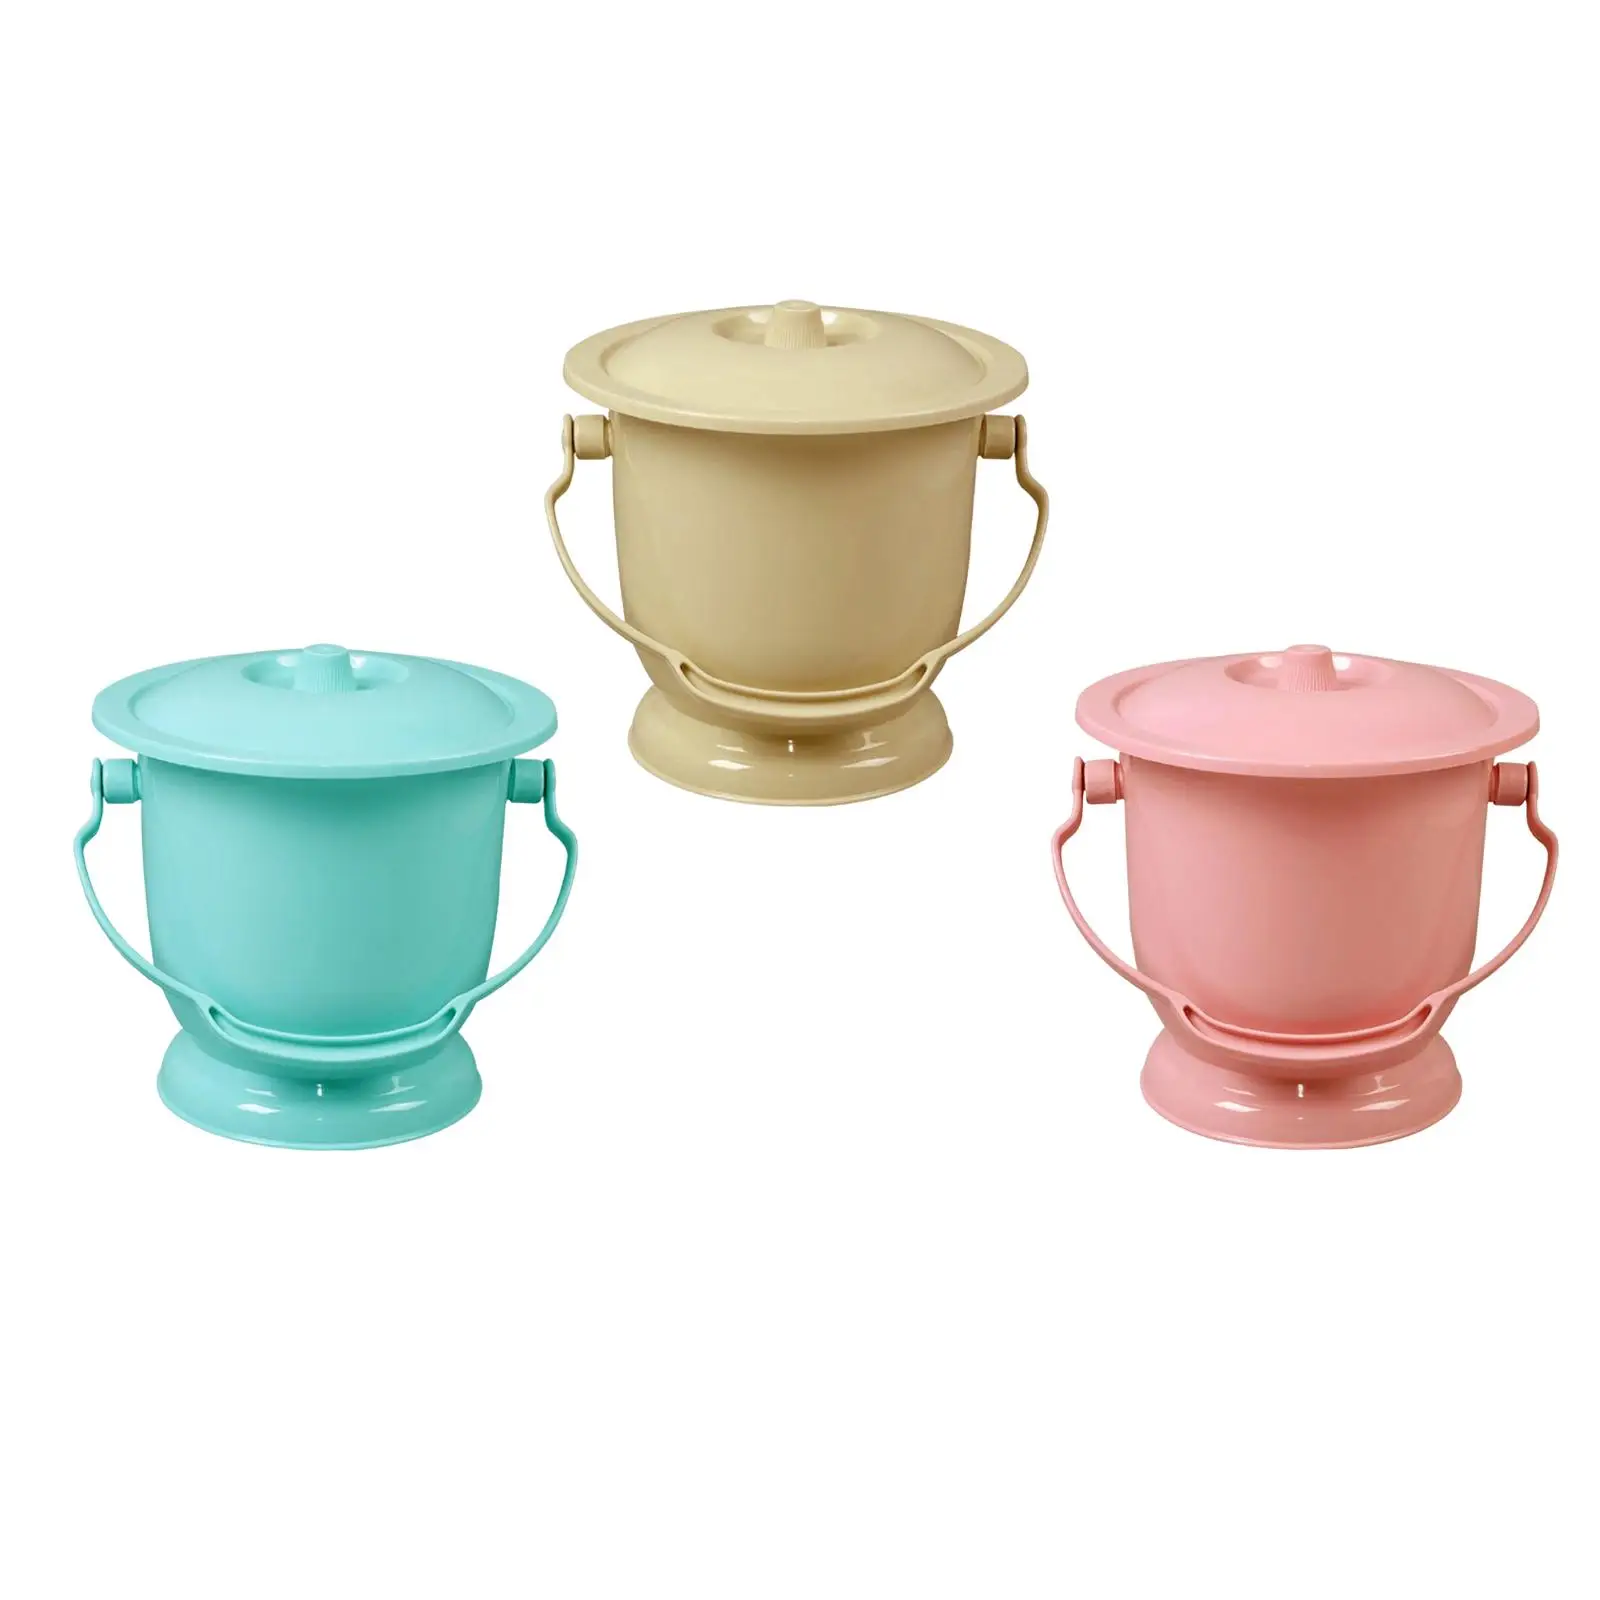 Chamber Pot with Lid Bedpan Spittoon Practical Mini Toilets Urine Bucket